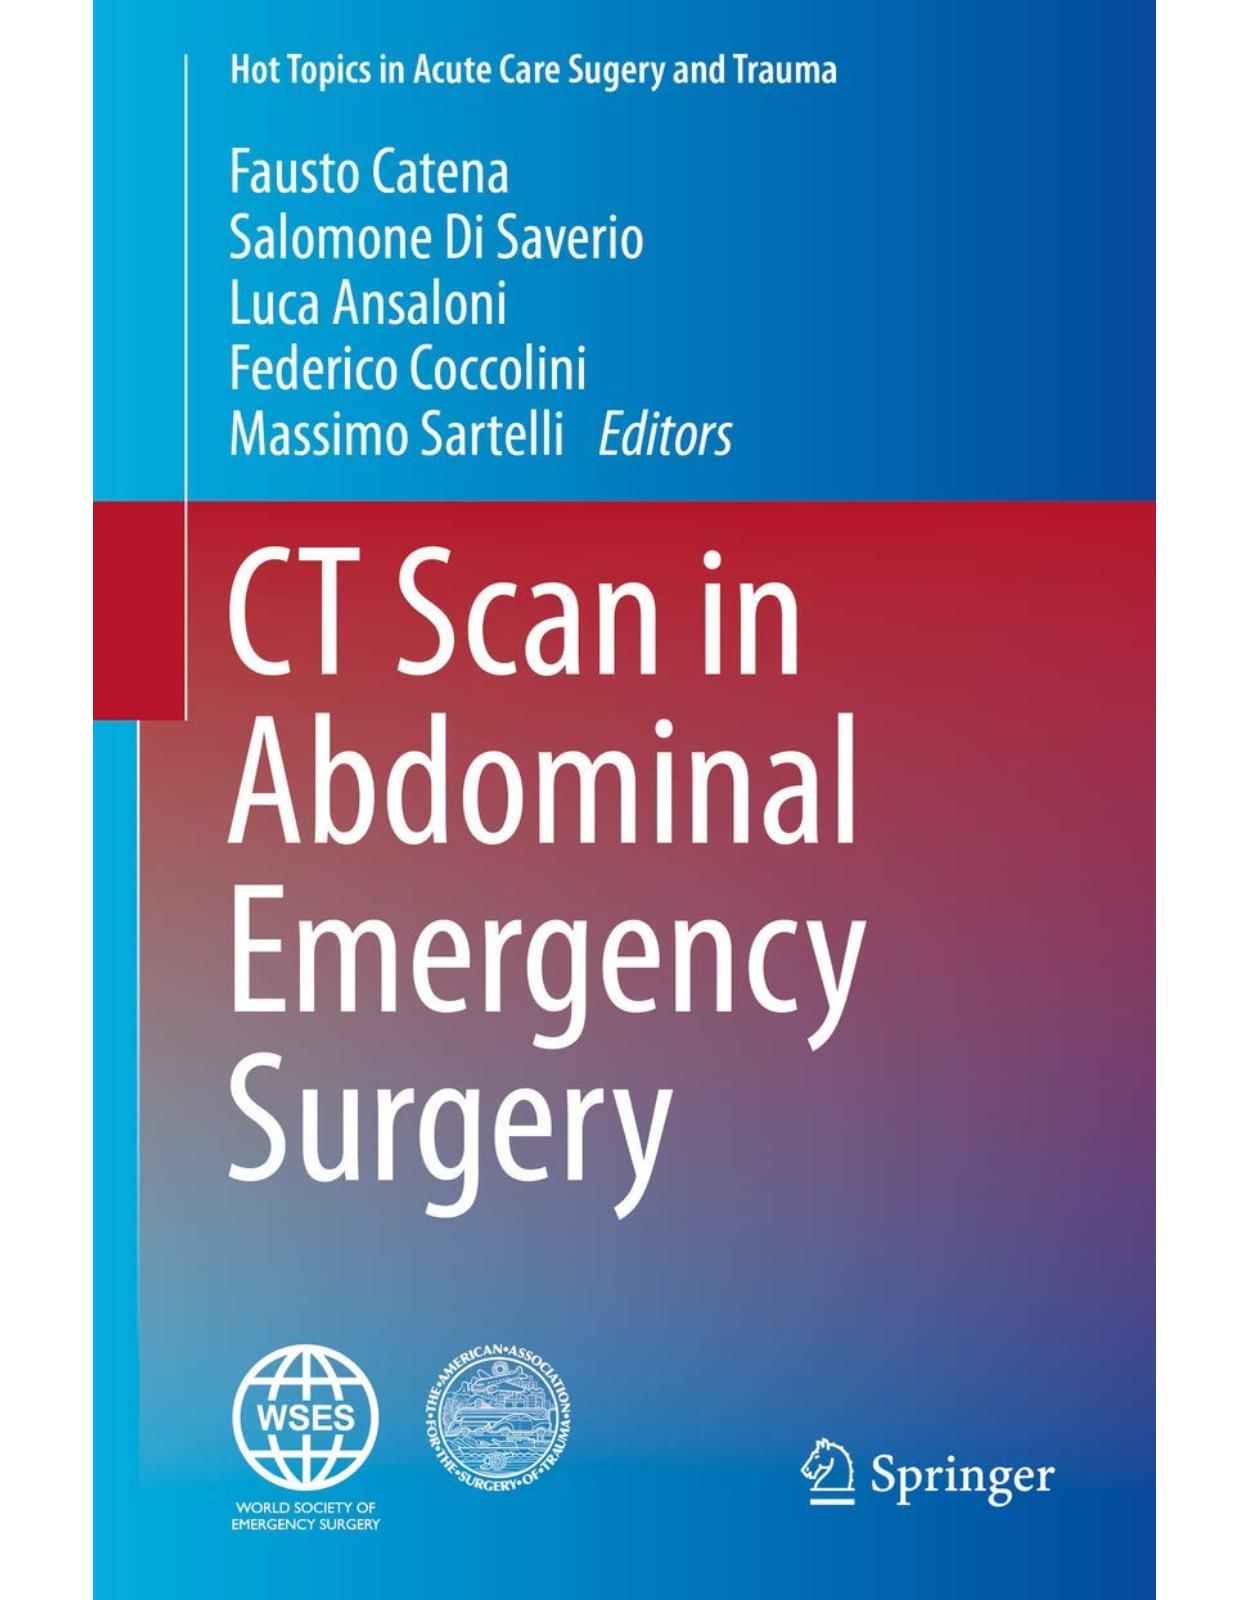 CT Scan in Abdominal Emergency Surgery (Hot Topics in Acute Care Surgery and Trauma)